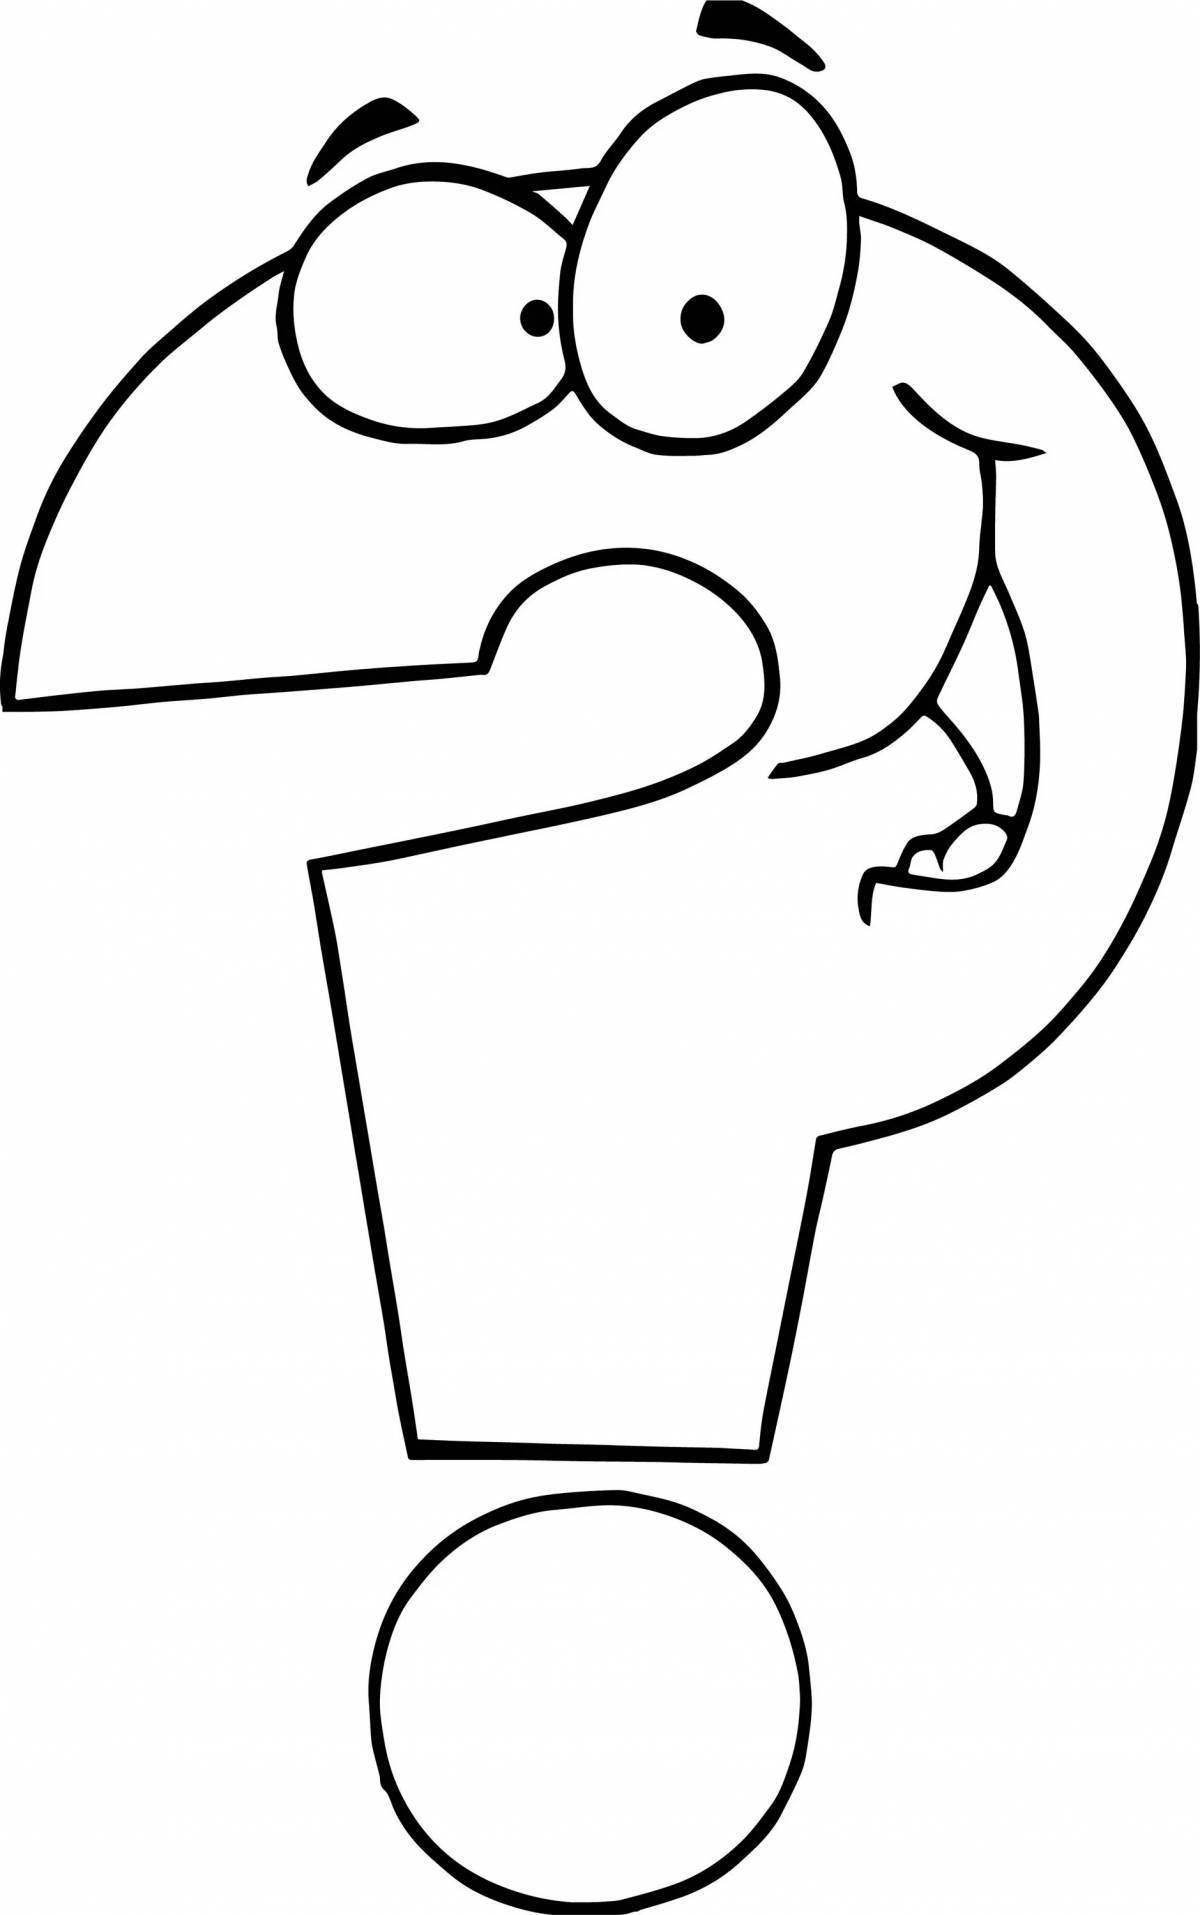 Bright question mark coloring page